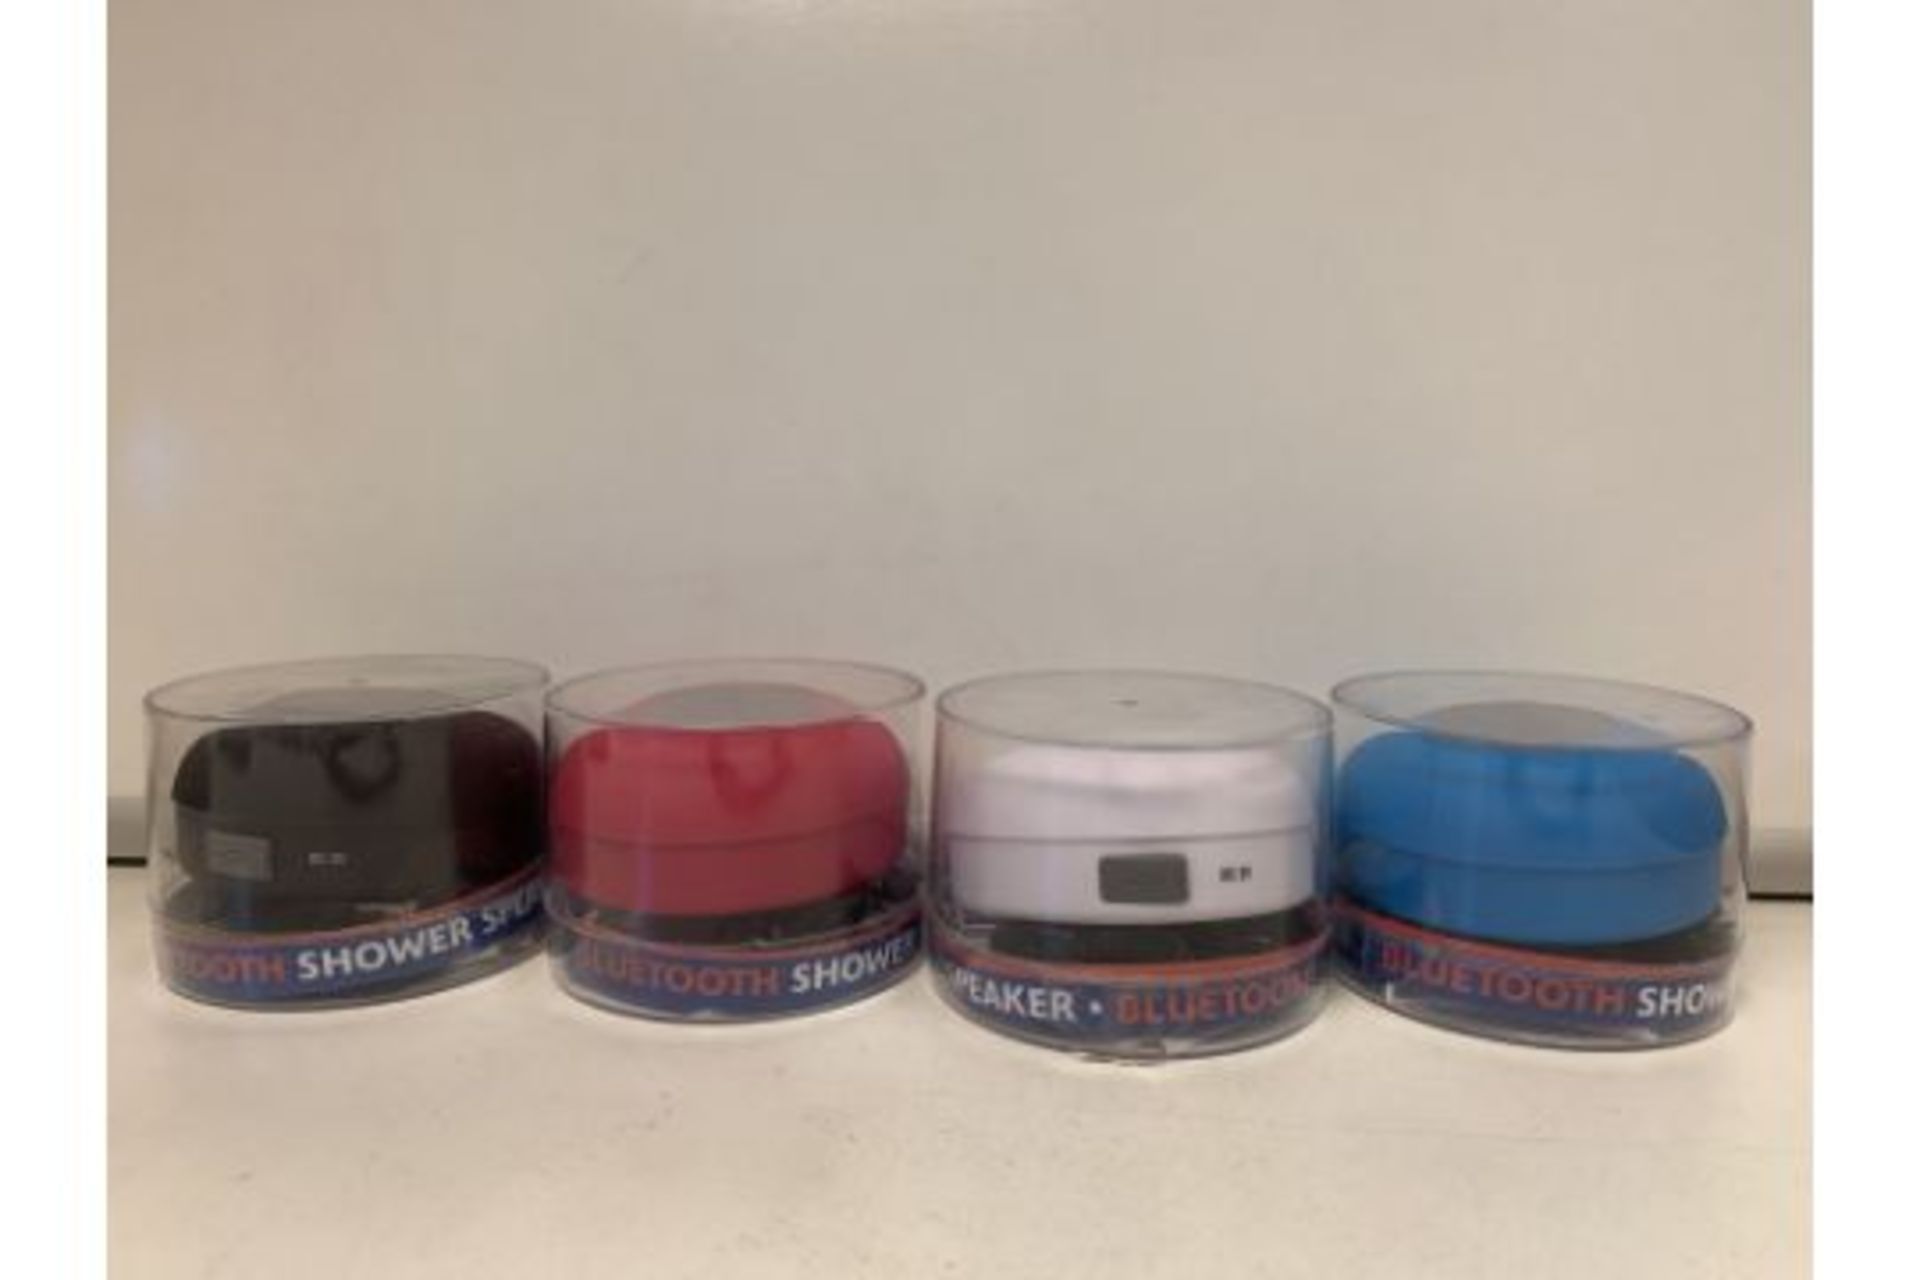 20 X NEW PACKAGED FALCON WATERPROOF BLUETOOTH SHOWER SPEAKERS. IN ASSORTED COLOURS (1376/27)